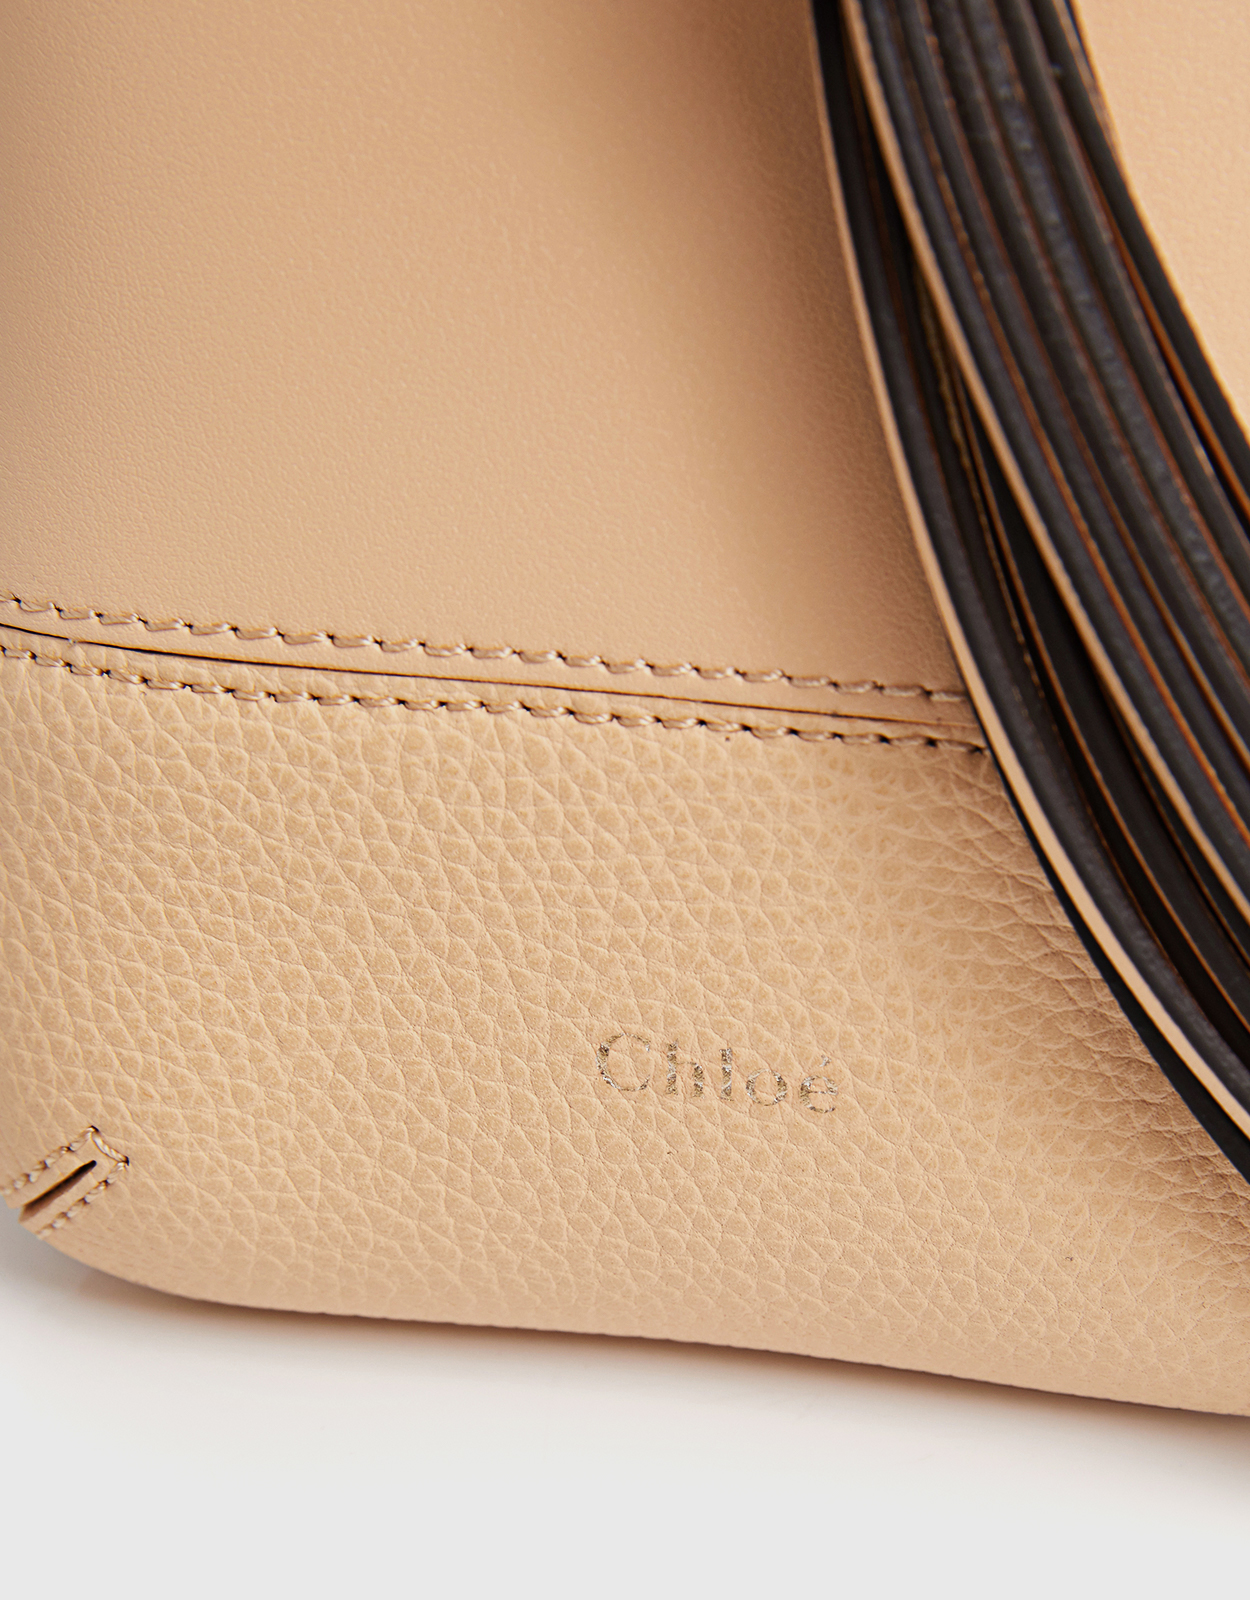 Chloé Walden Small Phone Pouch